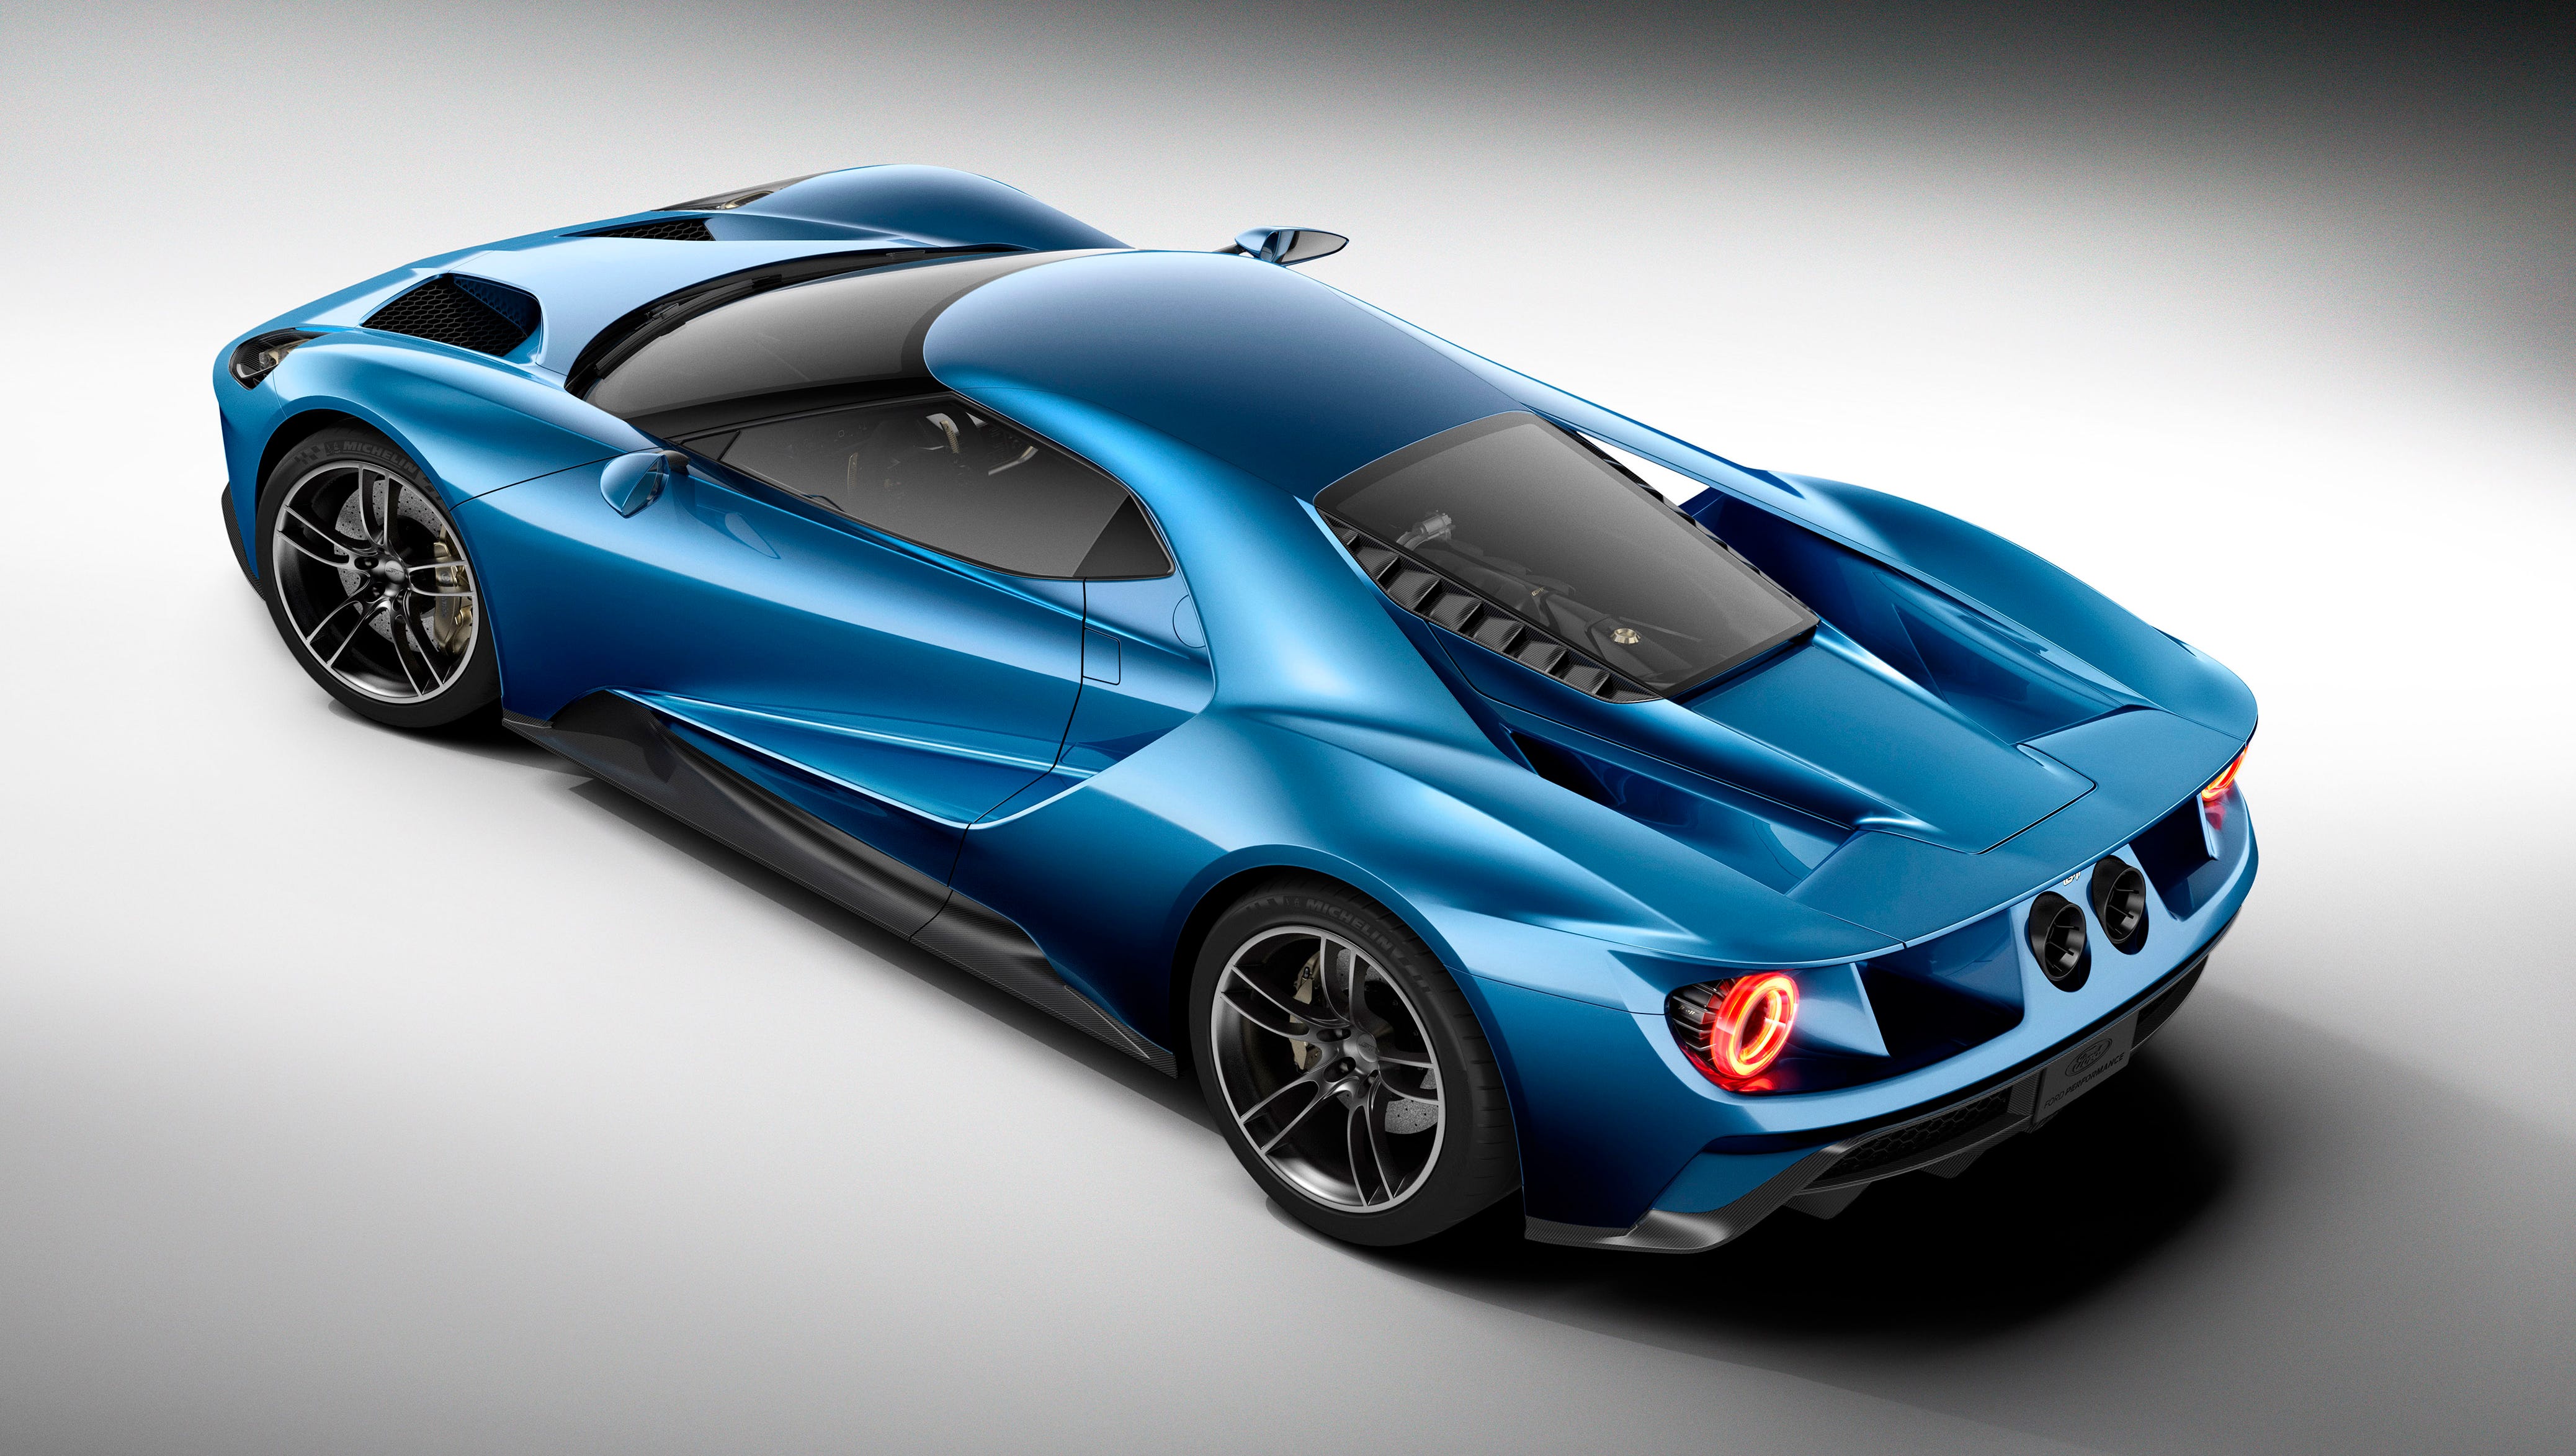 Ford will limit production of the supercar to 250 a year.